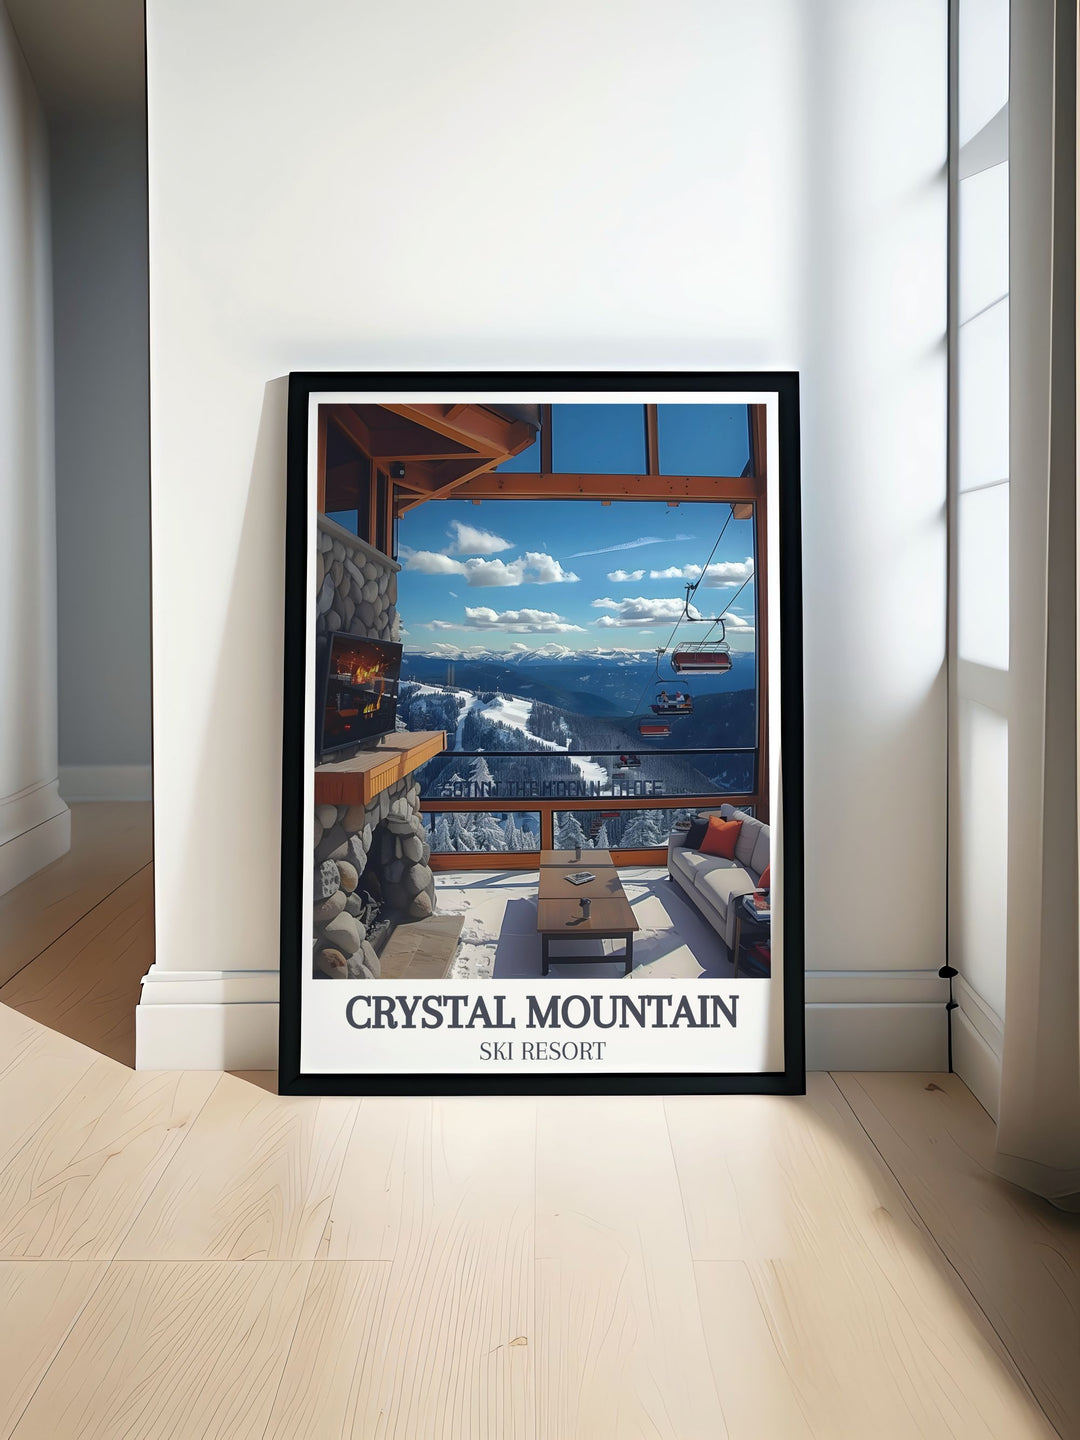 Fine art print showcasing Crystal Mountains expansive slopes with Mount Rainier in the backdrop, ideal for ski enthusiasts.